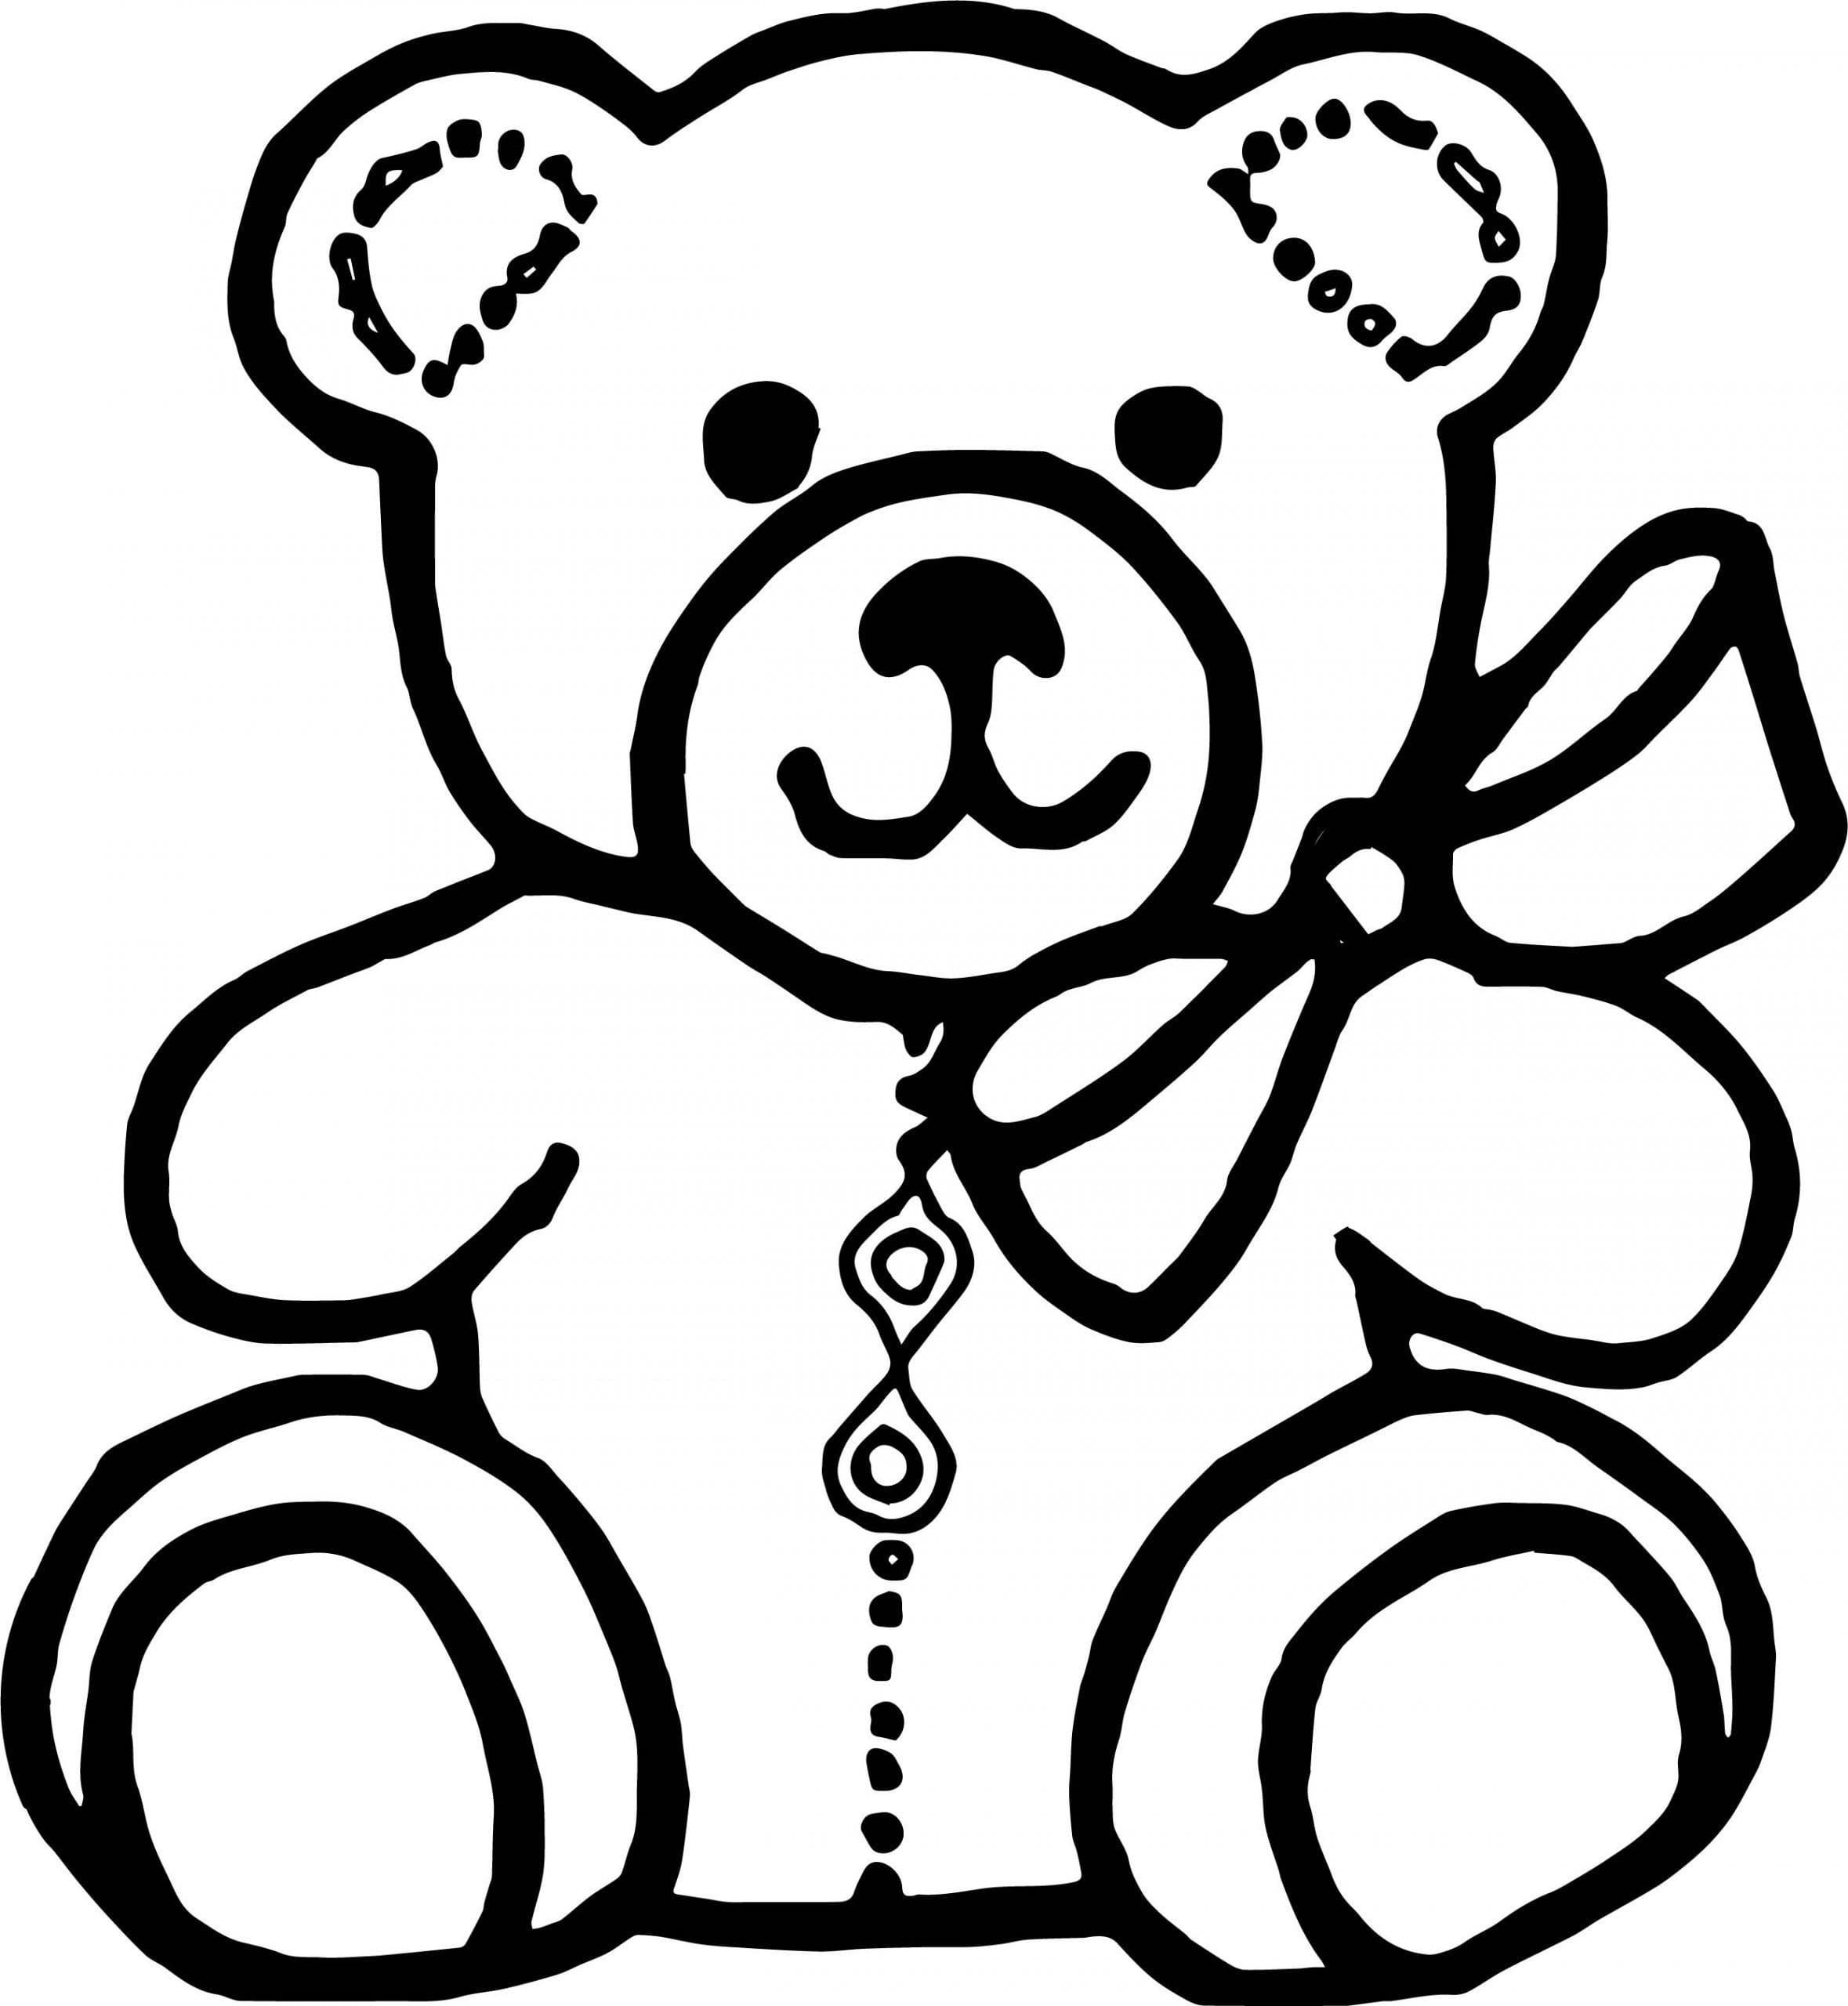 Coloring pages teddy bear